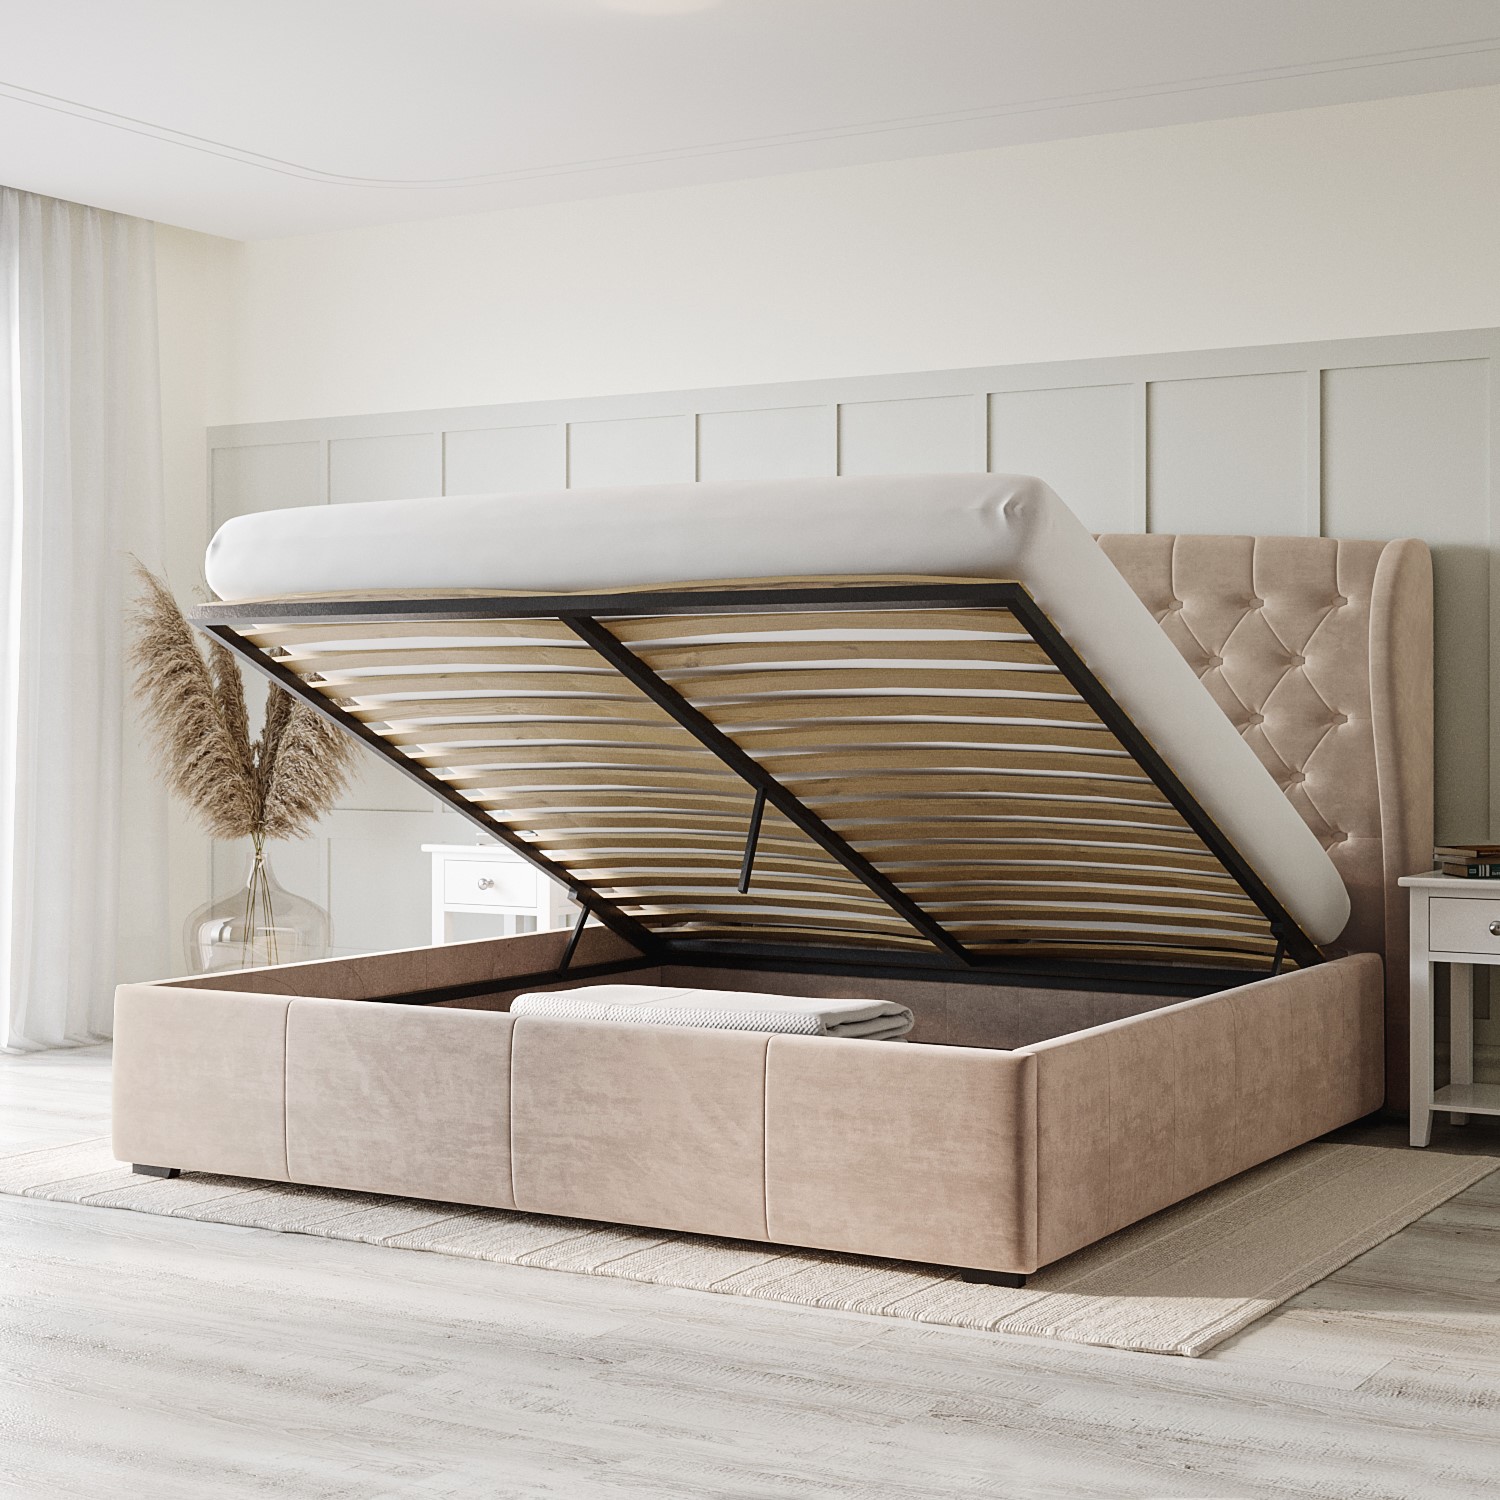 Read more about Beige velvet super king ottoman bed with winged headboard safina